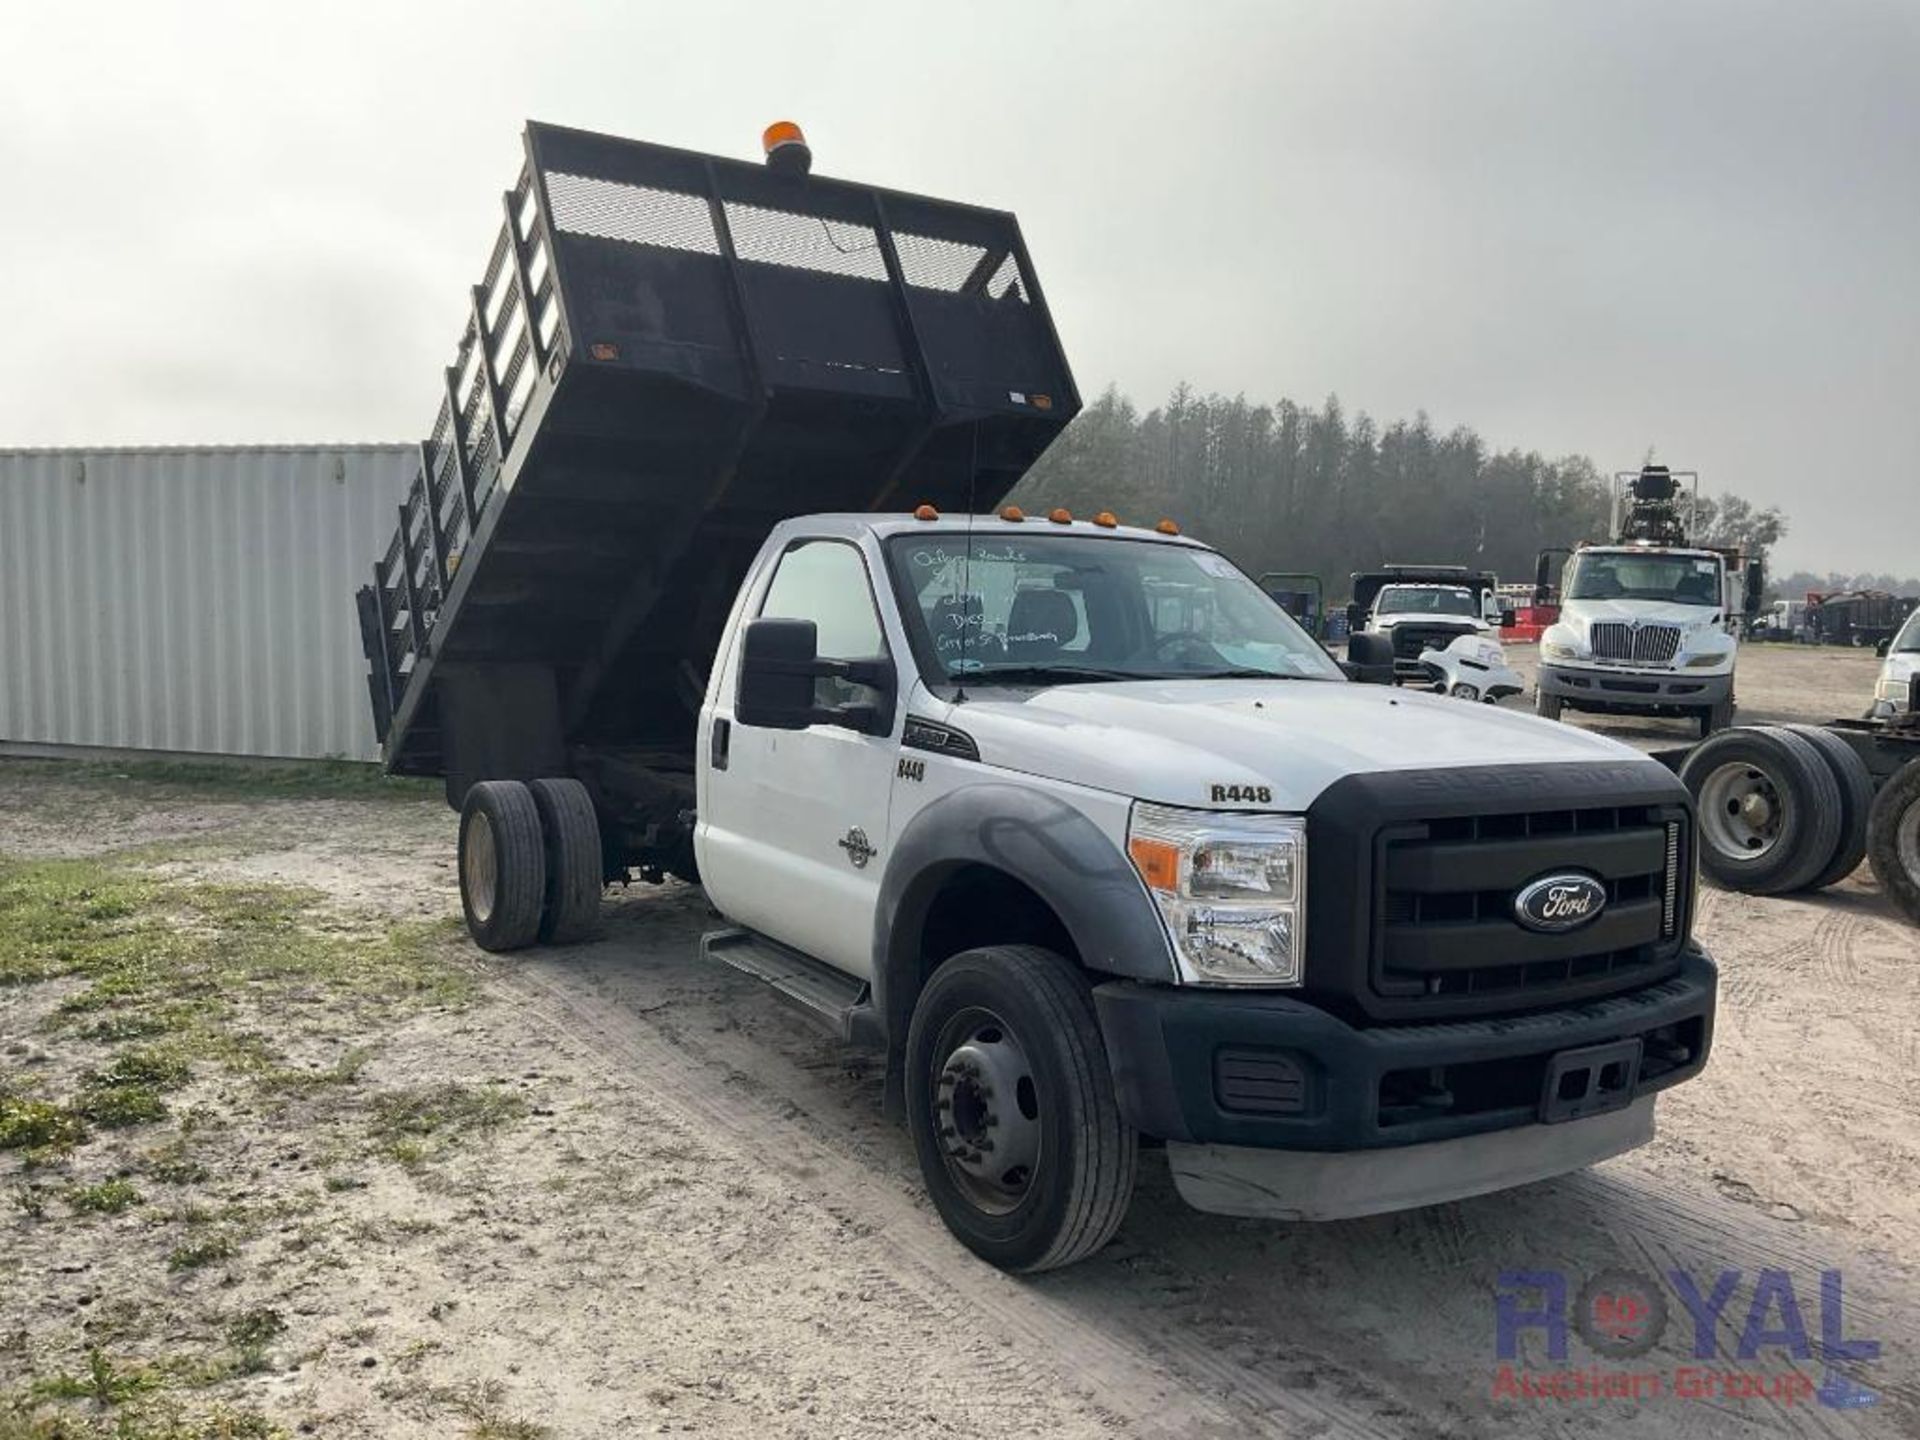 2011 Ford F550 Super Duty Stakebody Flatbed Dump Truck - Image 2 of 26